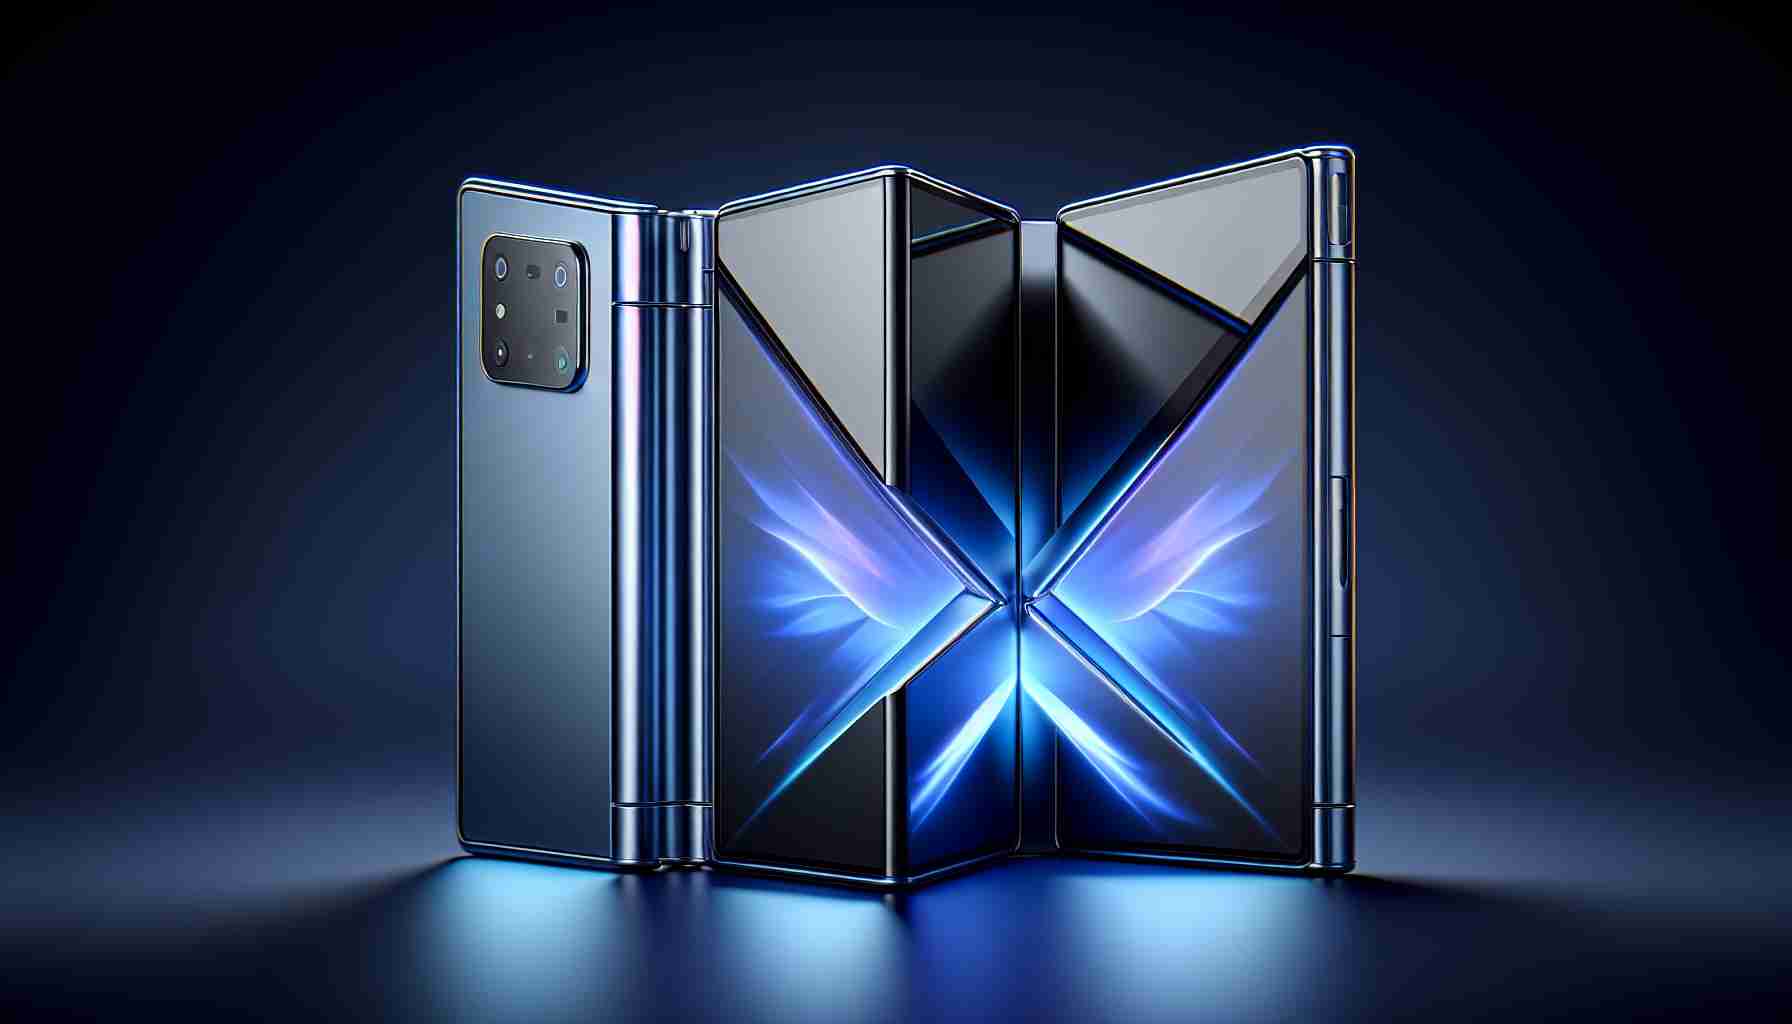 Samsung’s Next Foldable Phone: Lighter, Thinner, and More Affordable